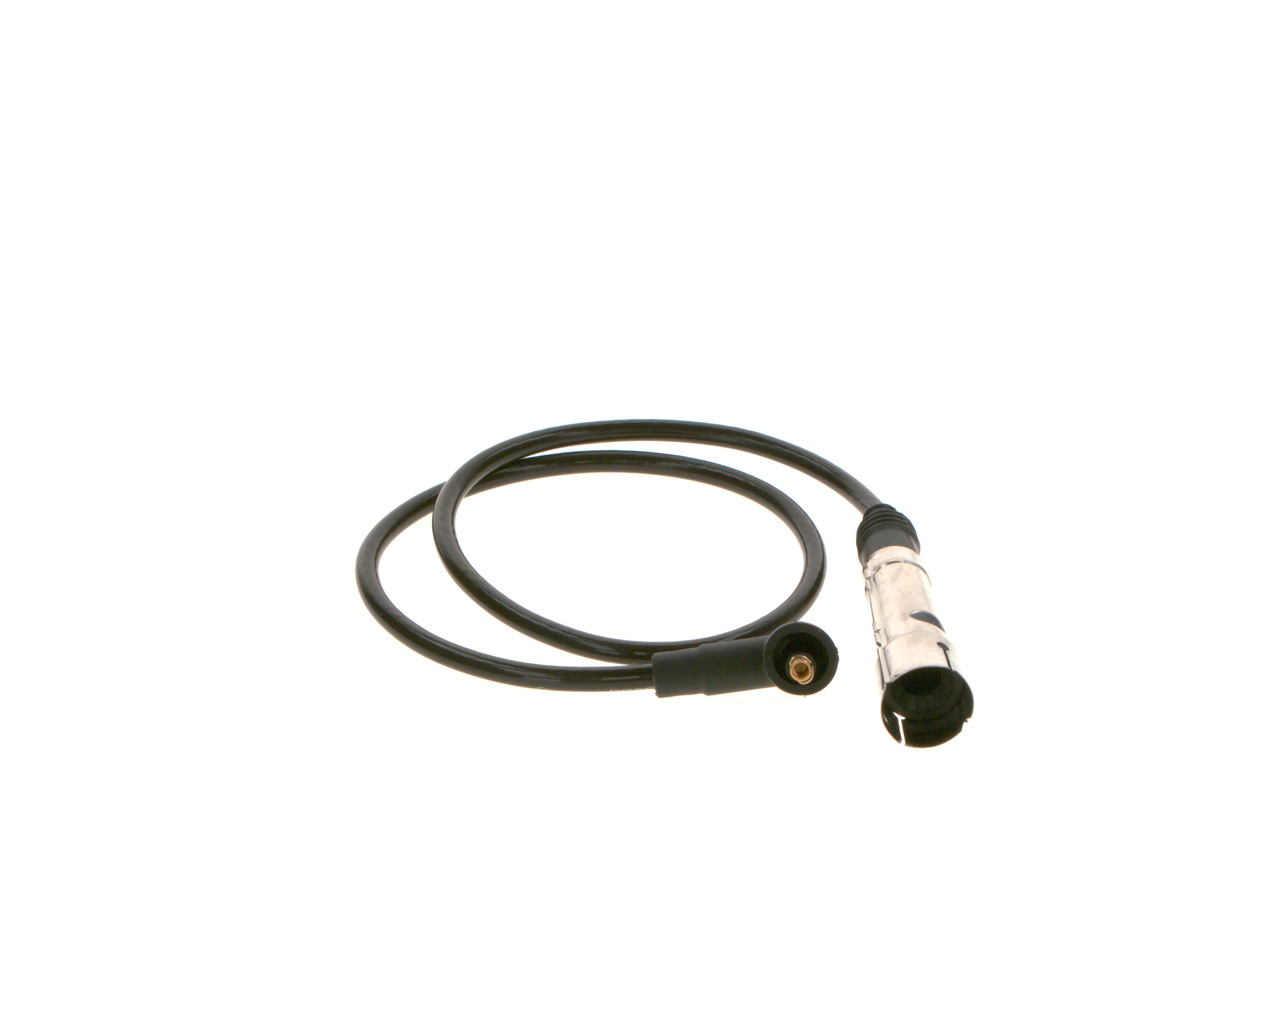 0986356371, Ignition Cable Kit, BOSCH, 701998031, 701998031A, 919, 9643, B371, ZEF707